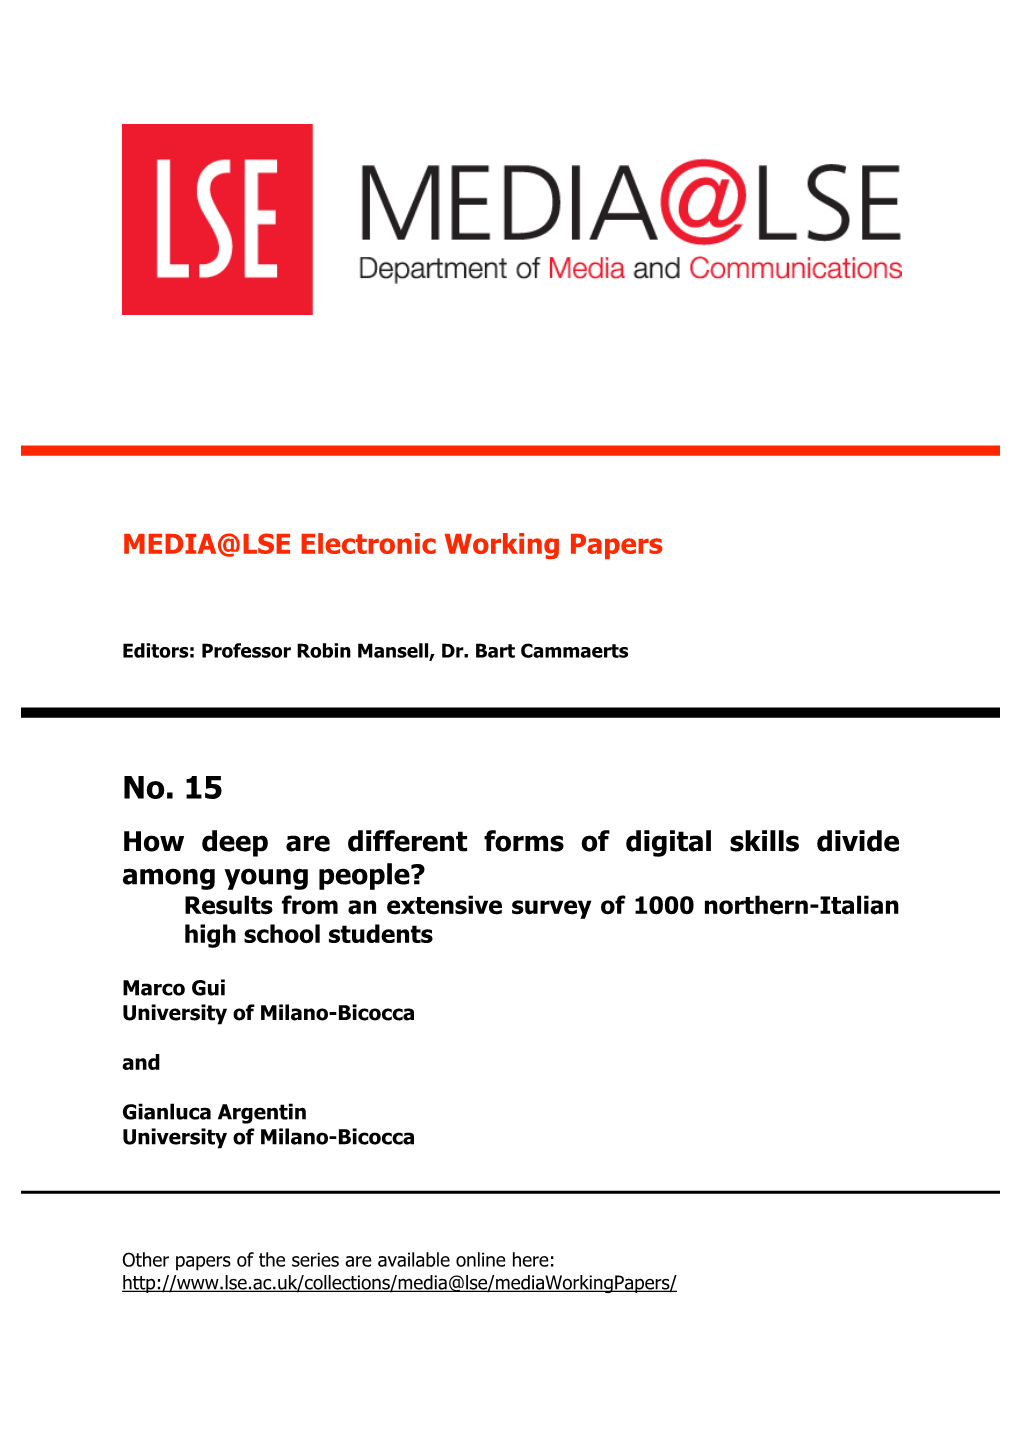 How Deep Are Different Forms of Digital Skills Divide Among Young People? Results from an Extensive Survey of 1000 Northern-Italian High School Students